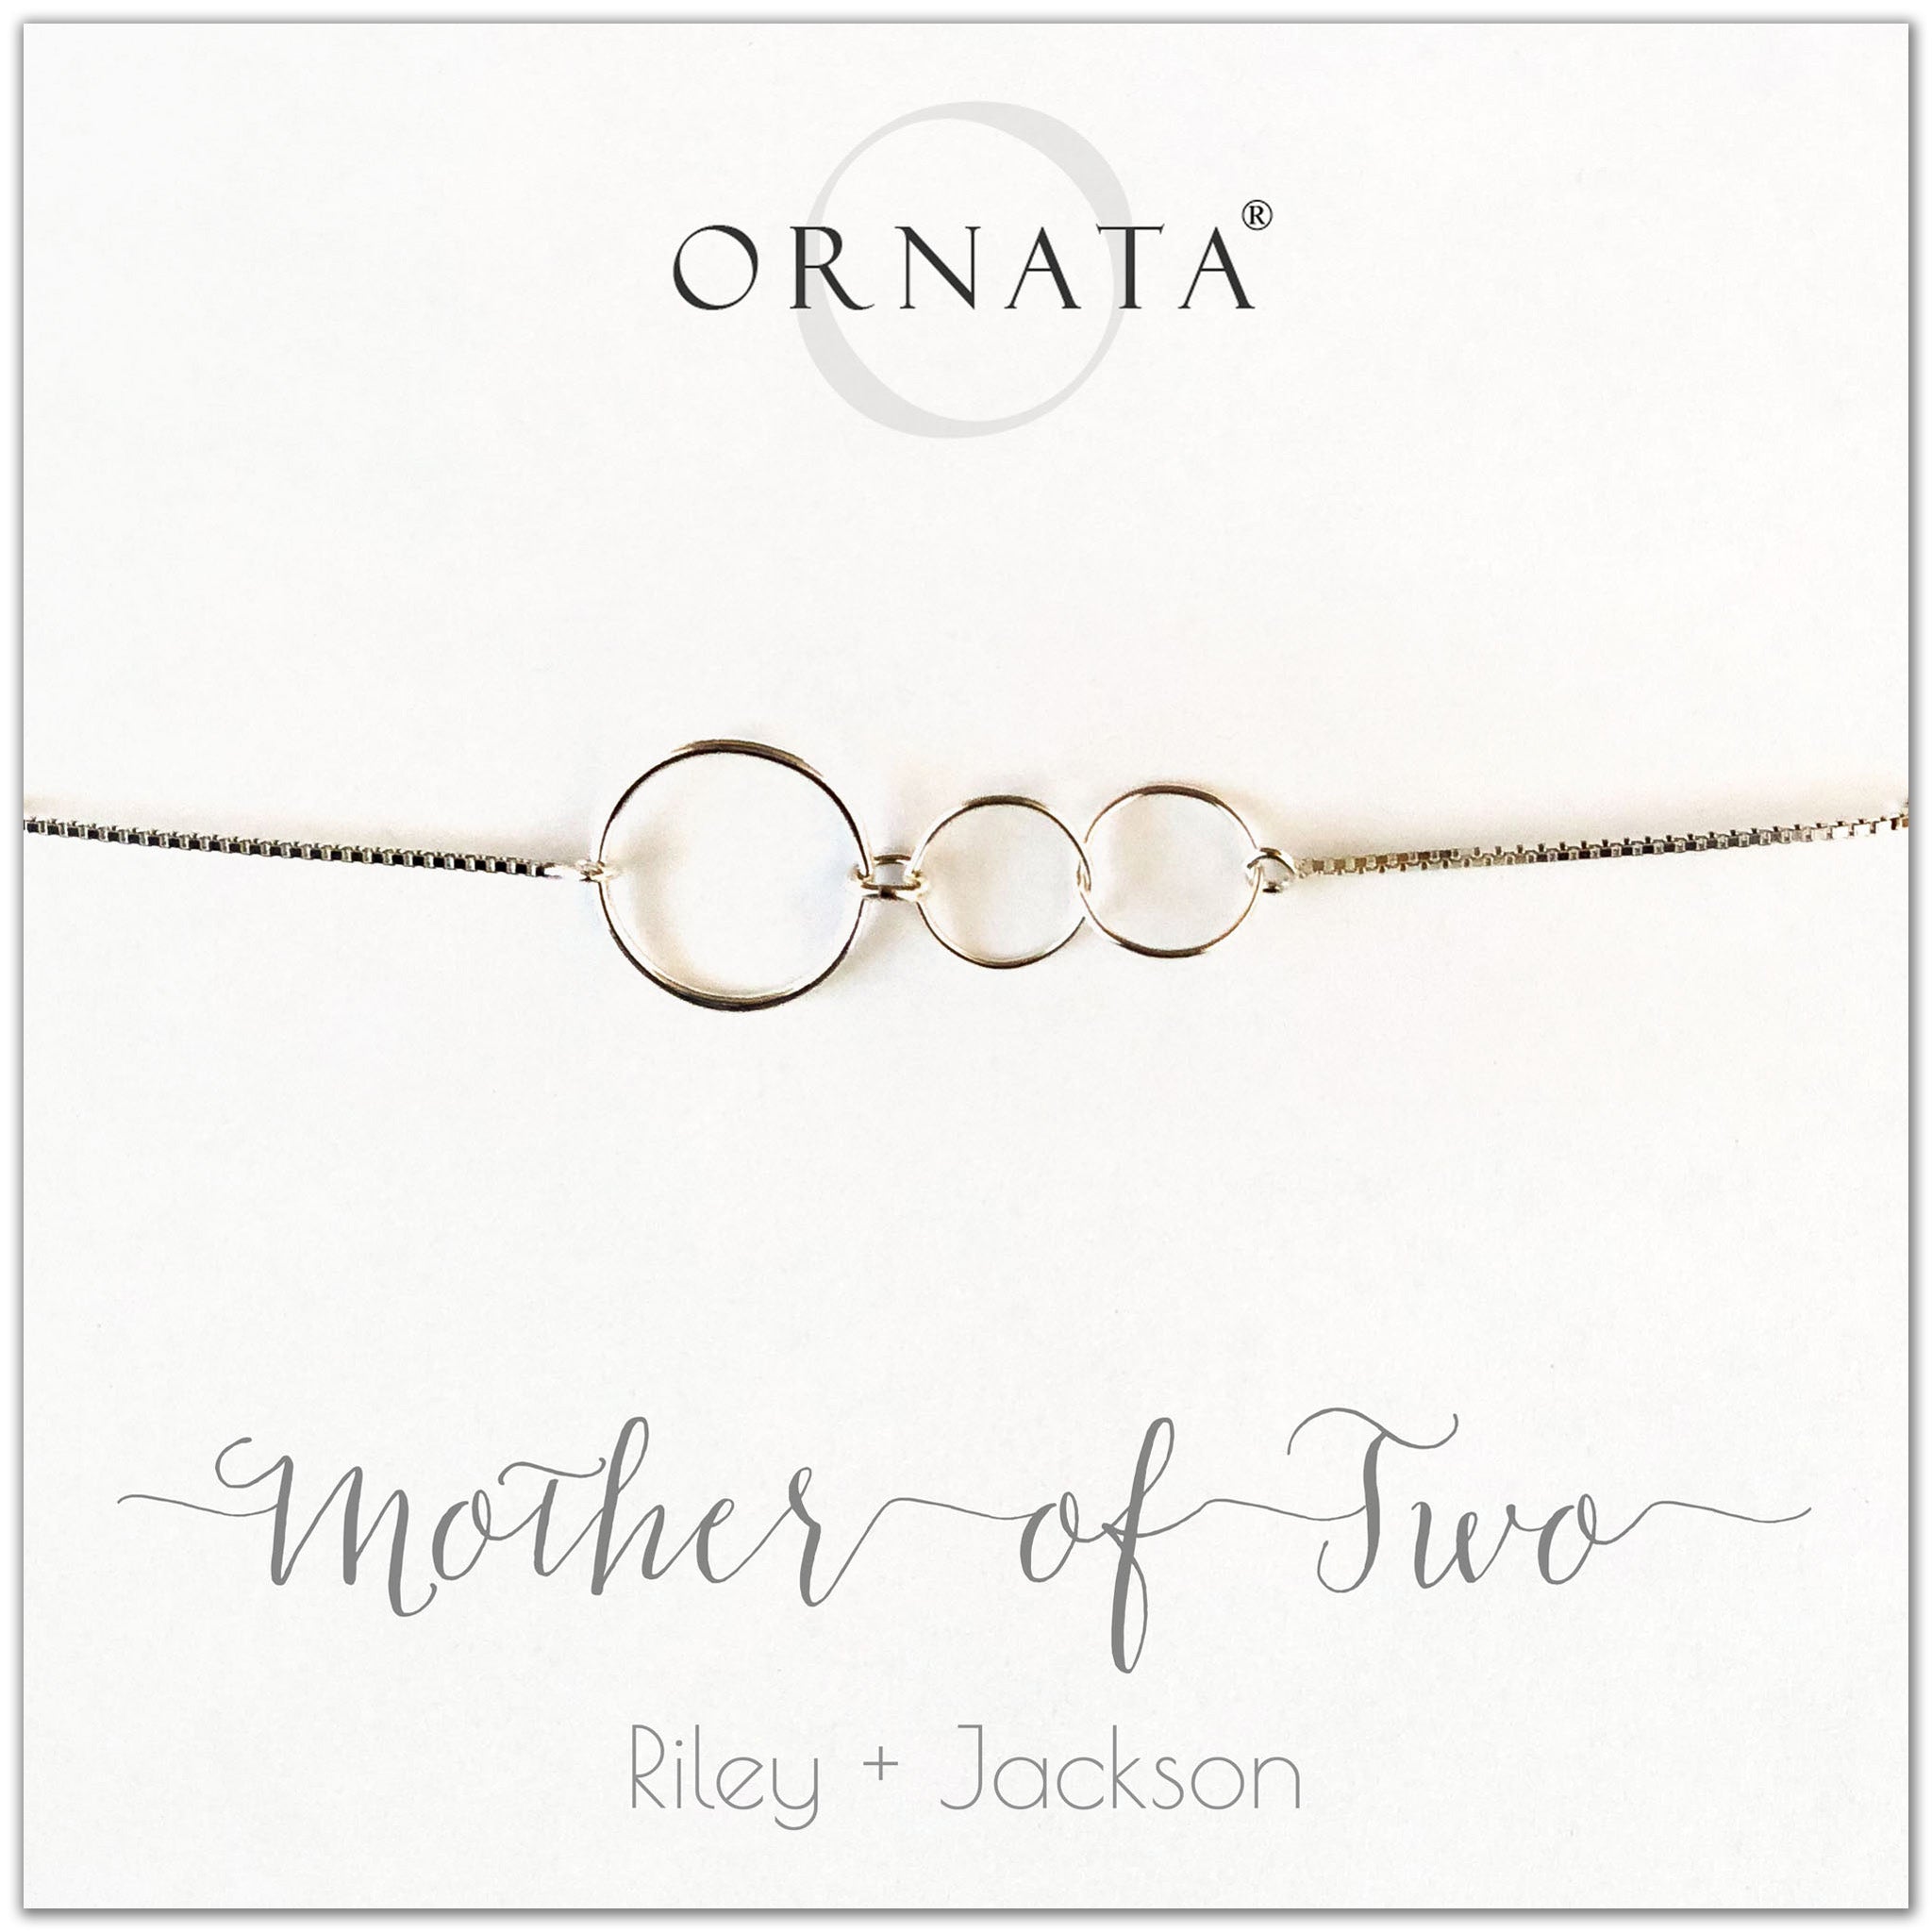 Mother of two personalized sterling silver bolo bracelet. Our custom bracelets make good gifts for moms and family. Great mother’s day gift.